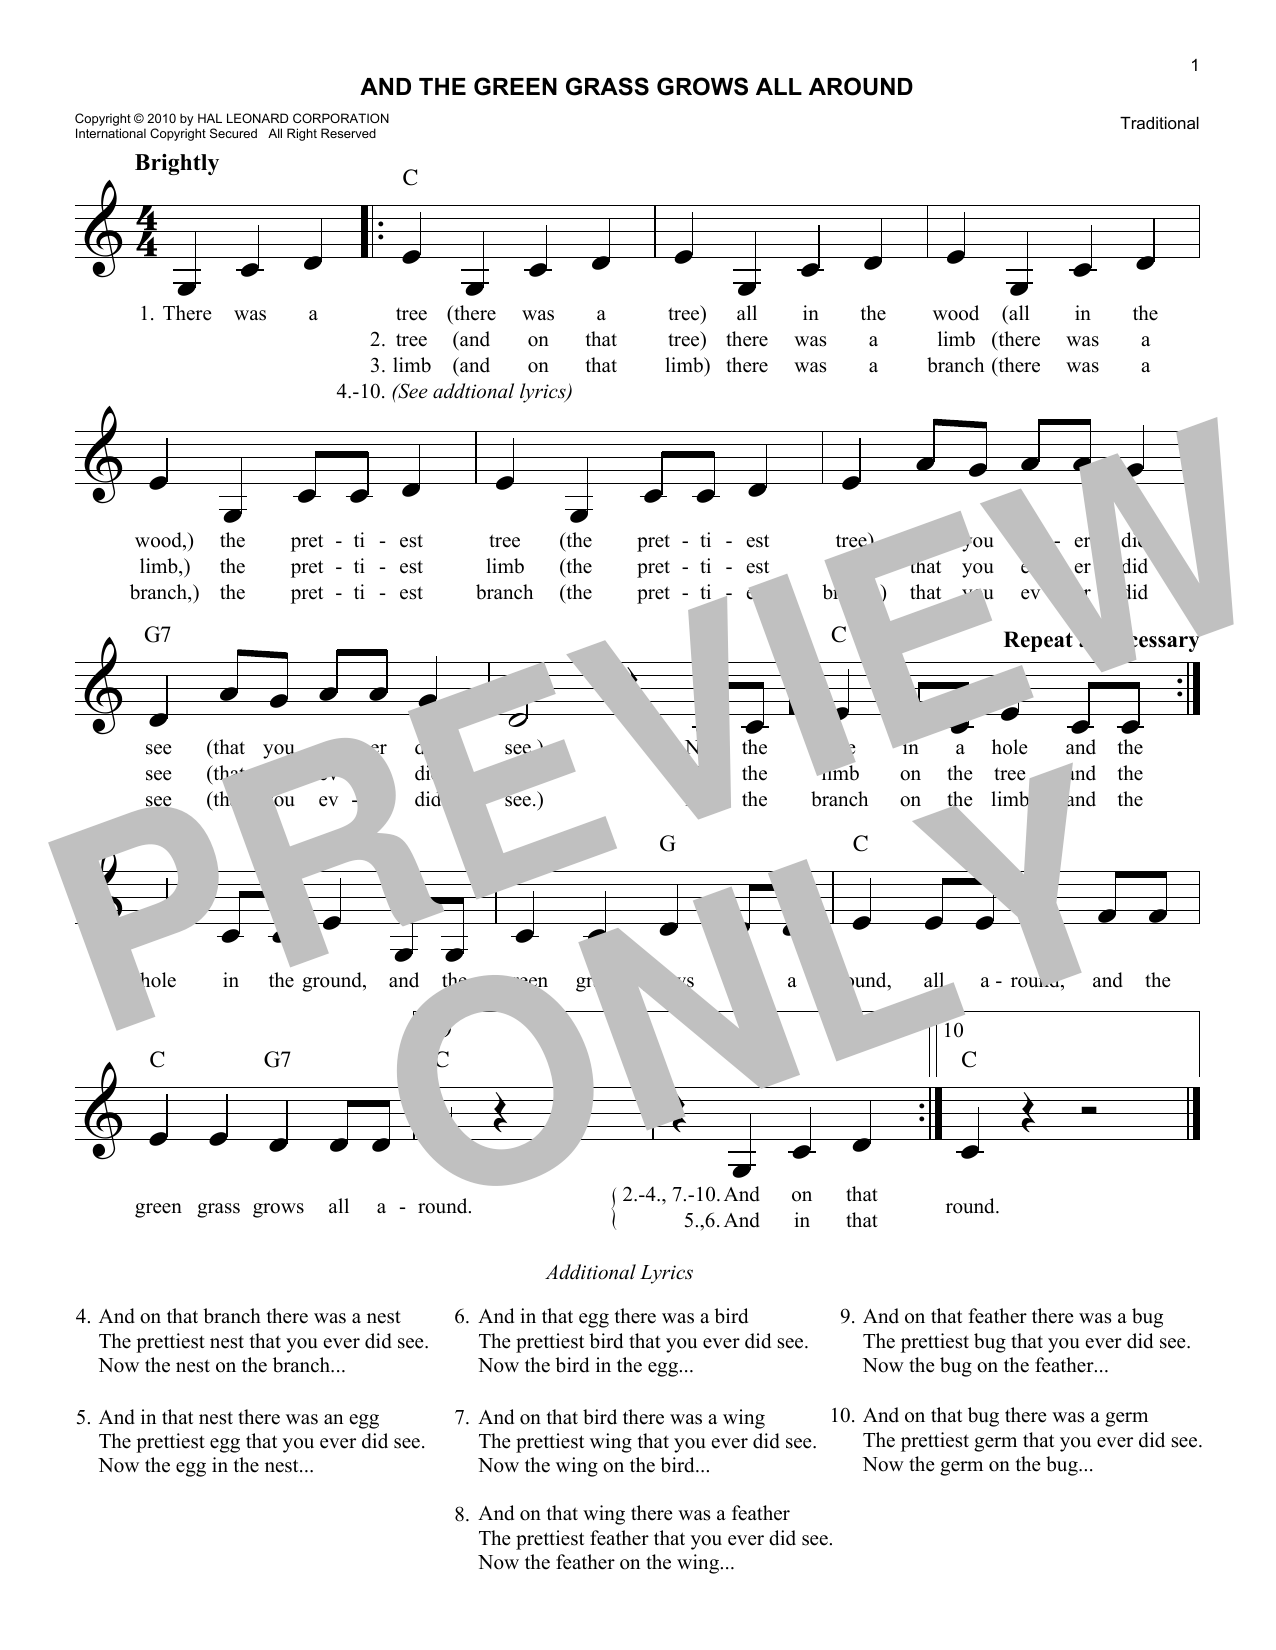 Download Traditional And The Green Grass Grows All Around Sheet Music